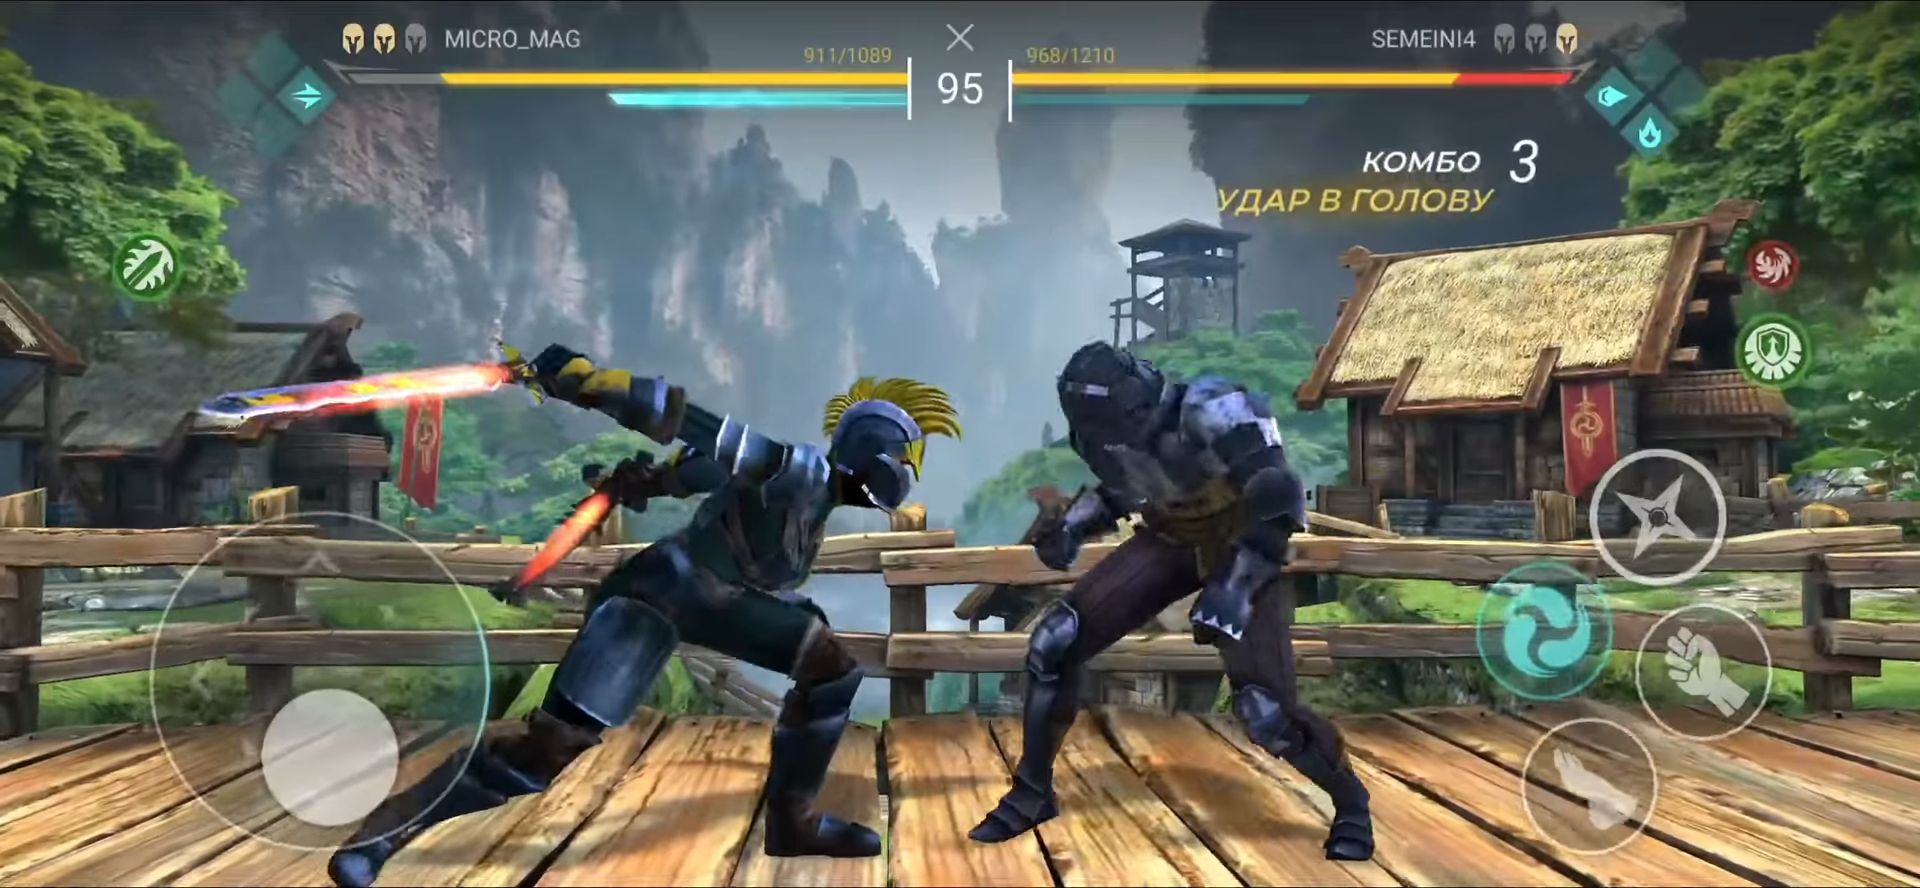 download shadow fight arena obb file download for free